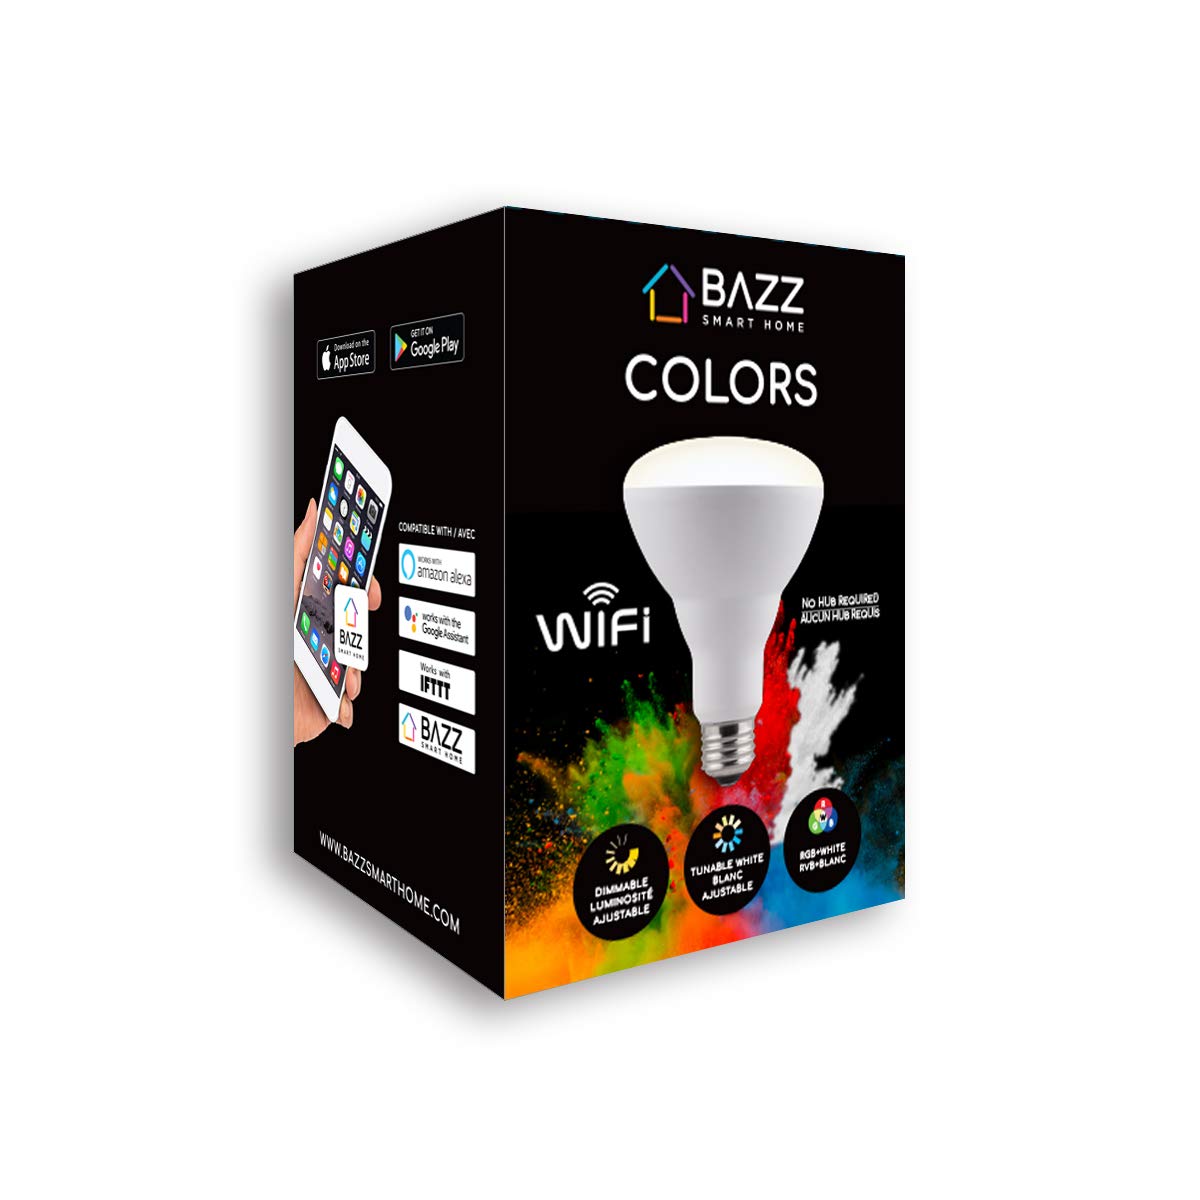 BAZZ BR30RGBTNWWF Smart Wi-Fi LED RGB BR30 10W Bulb, Dimmable, Energy Star, Color Change, Outdoor, Alexa and Google Home Compatible, Matte White